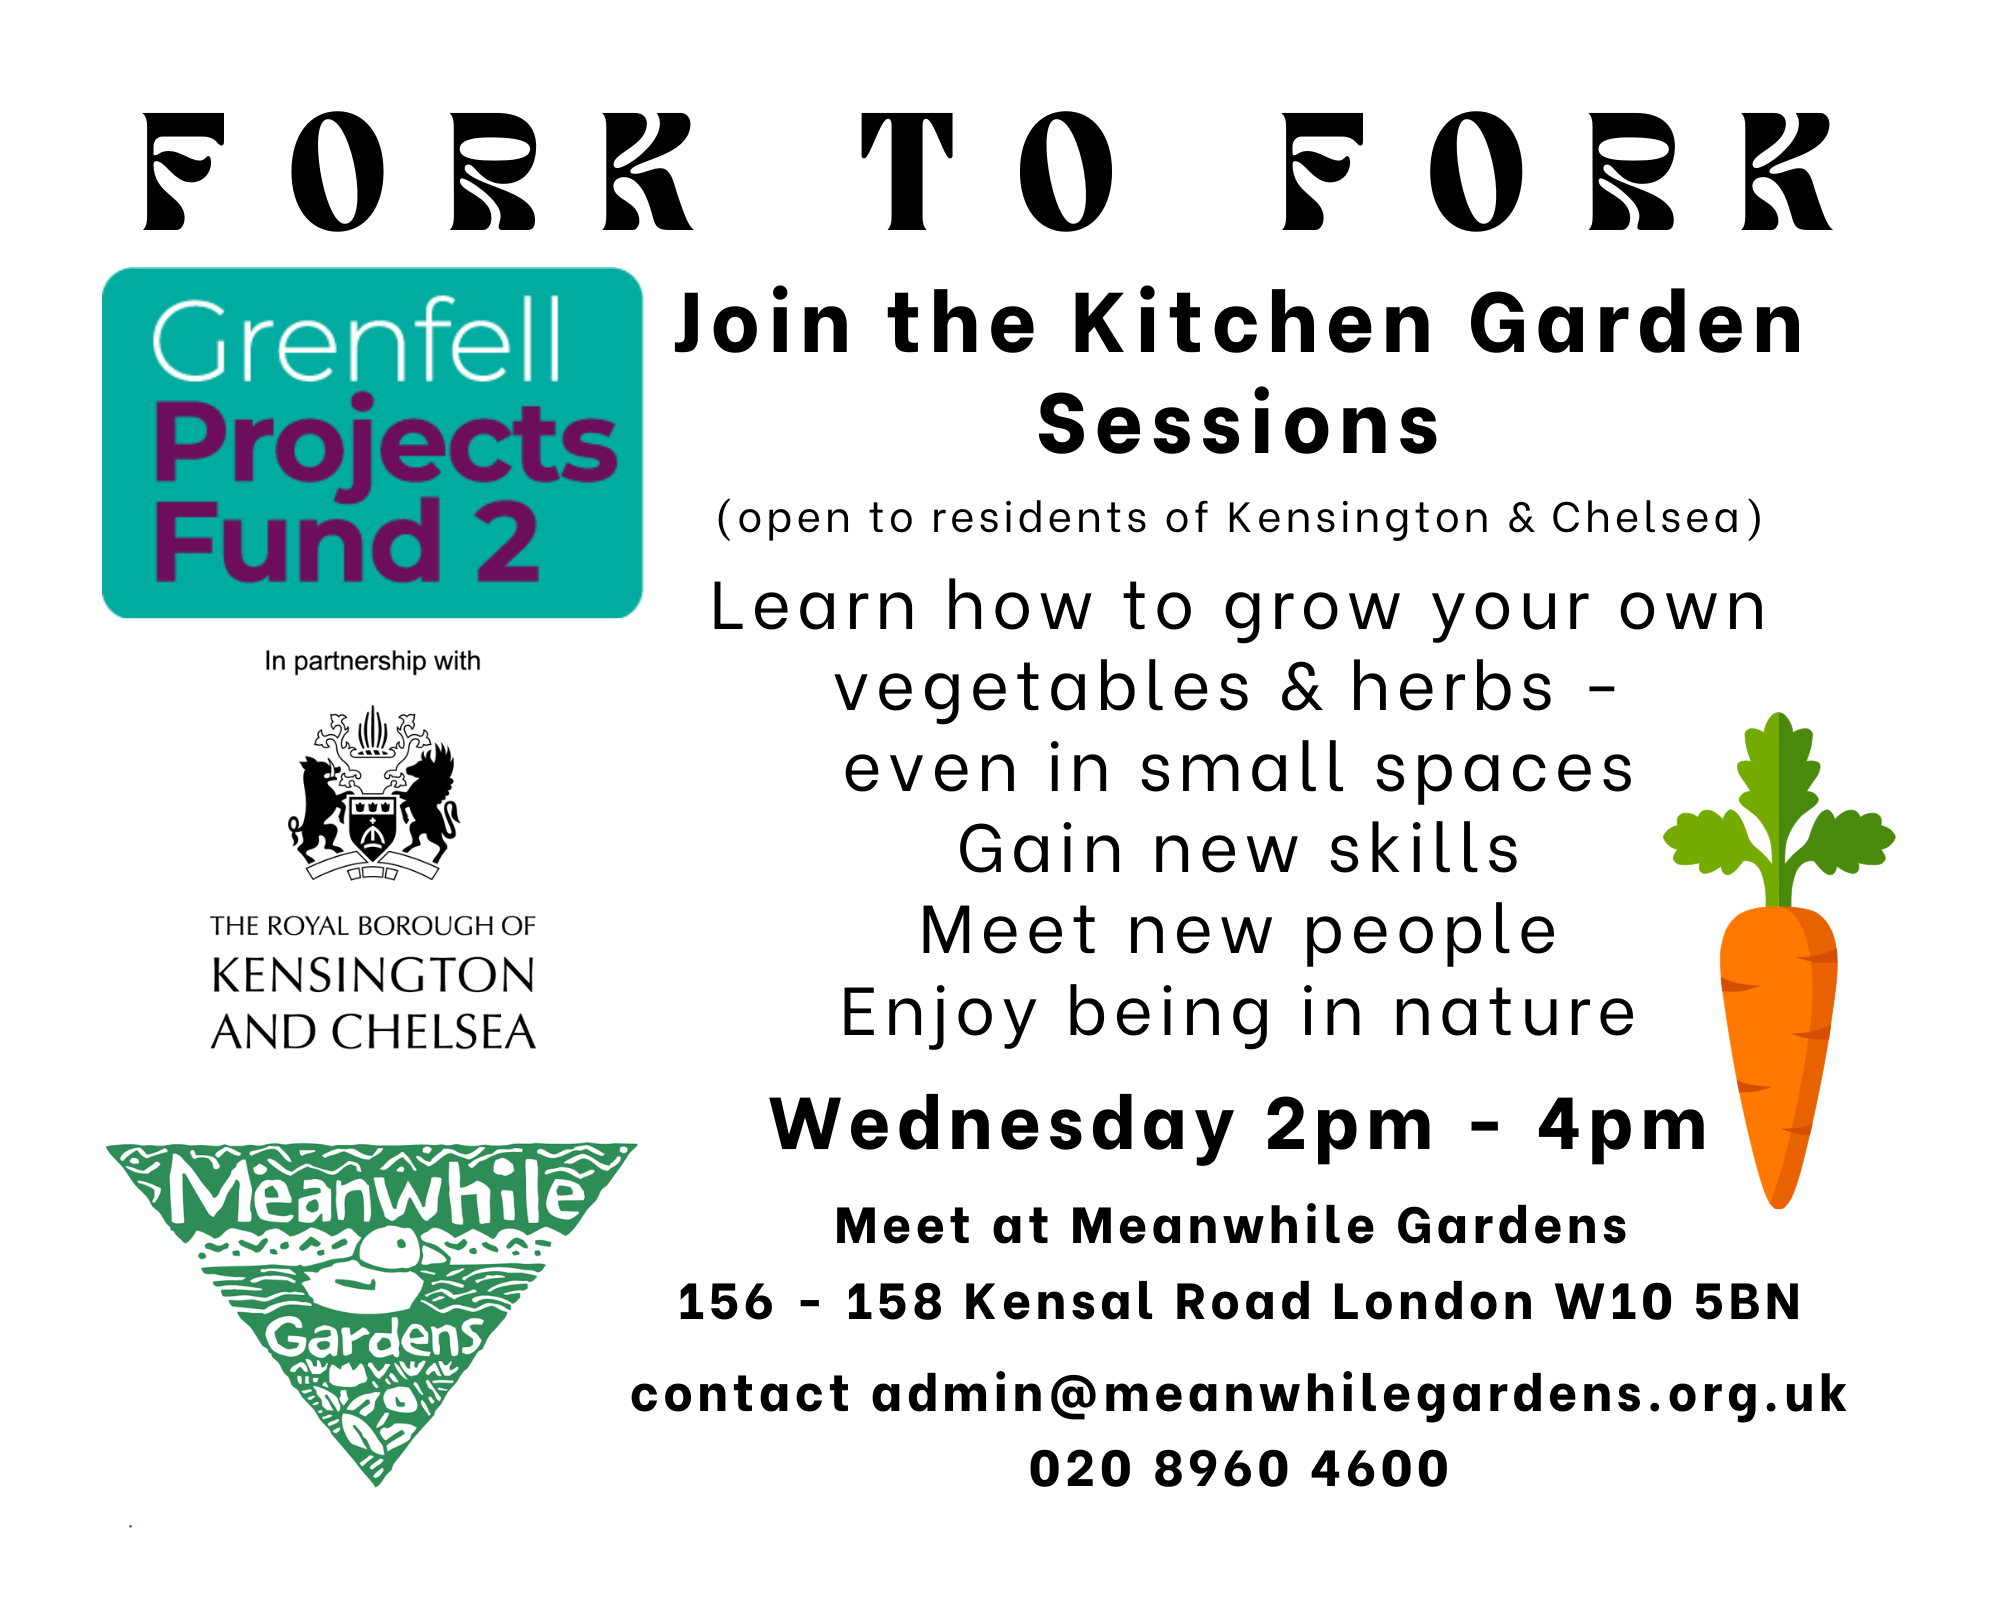 Fork to Fork gardening sessions at Meanwhile